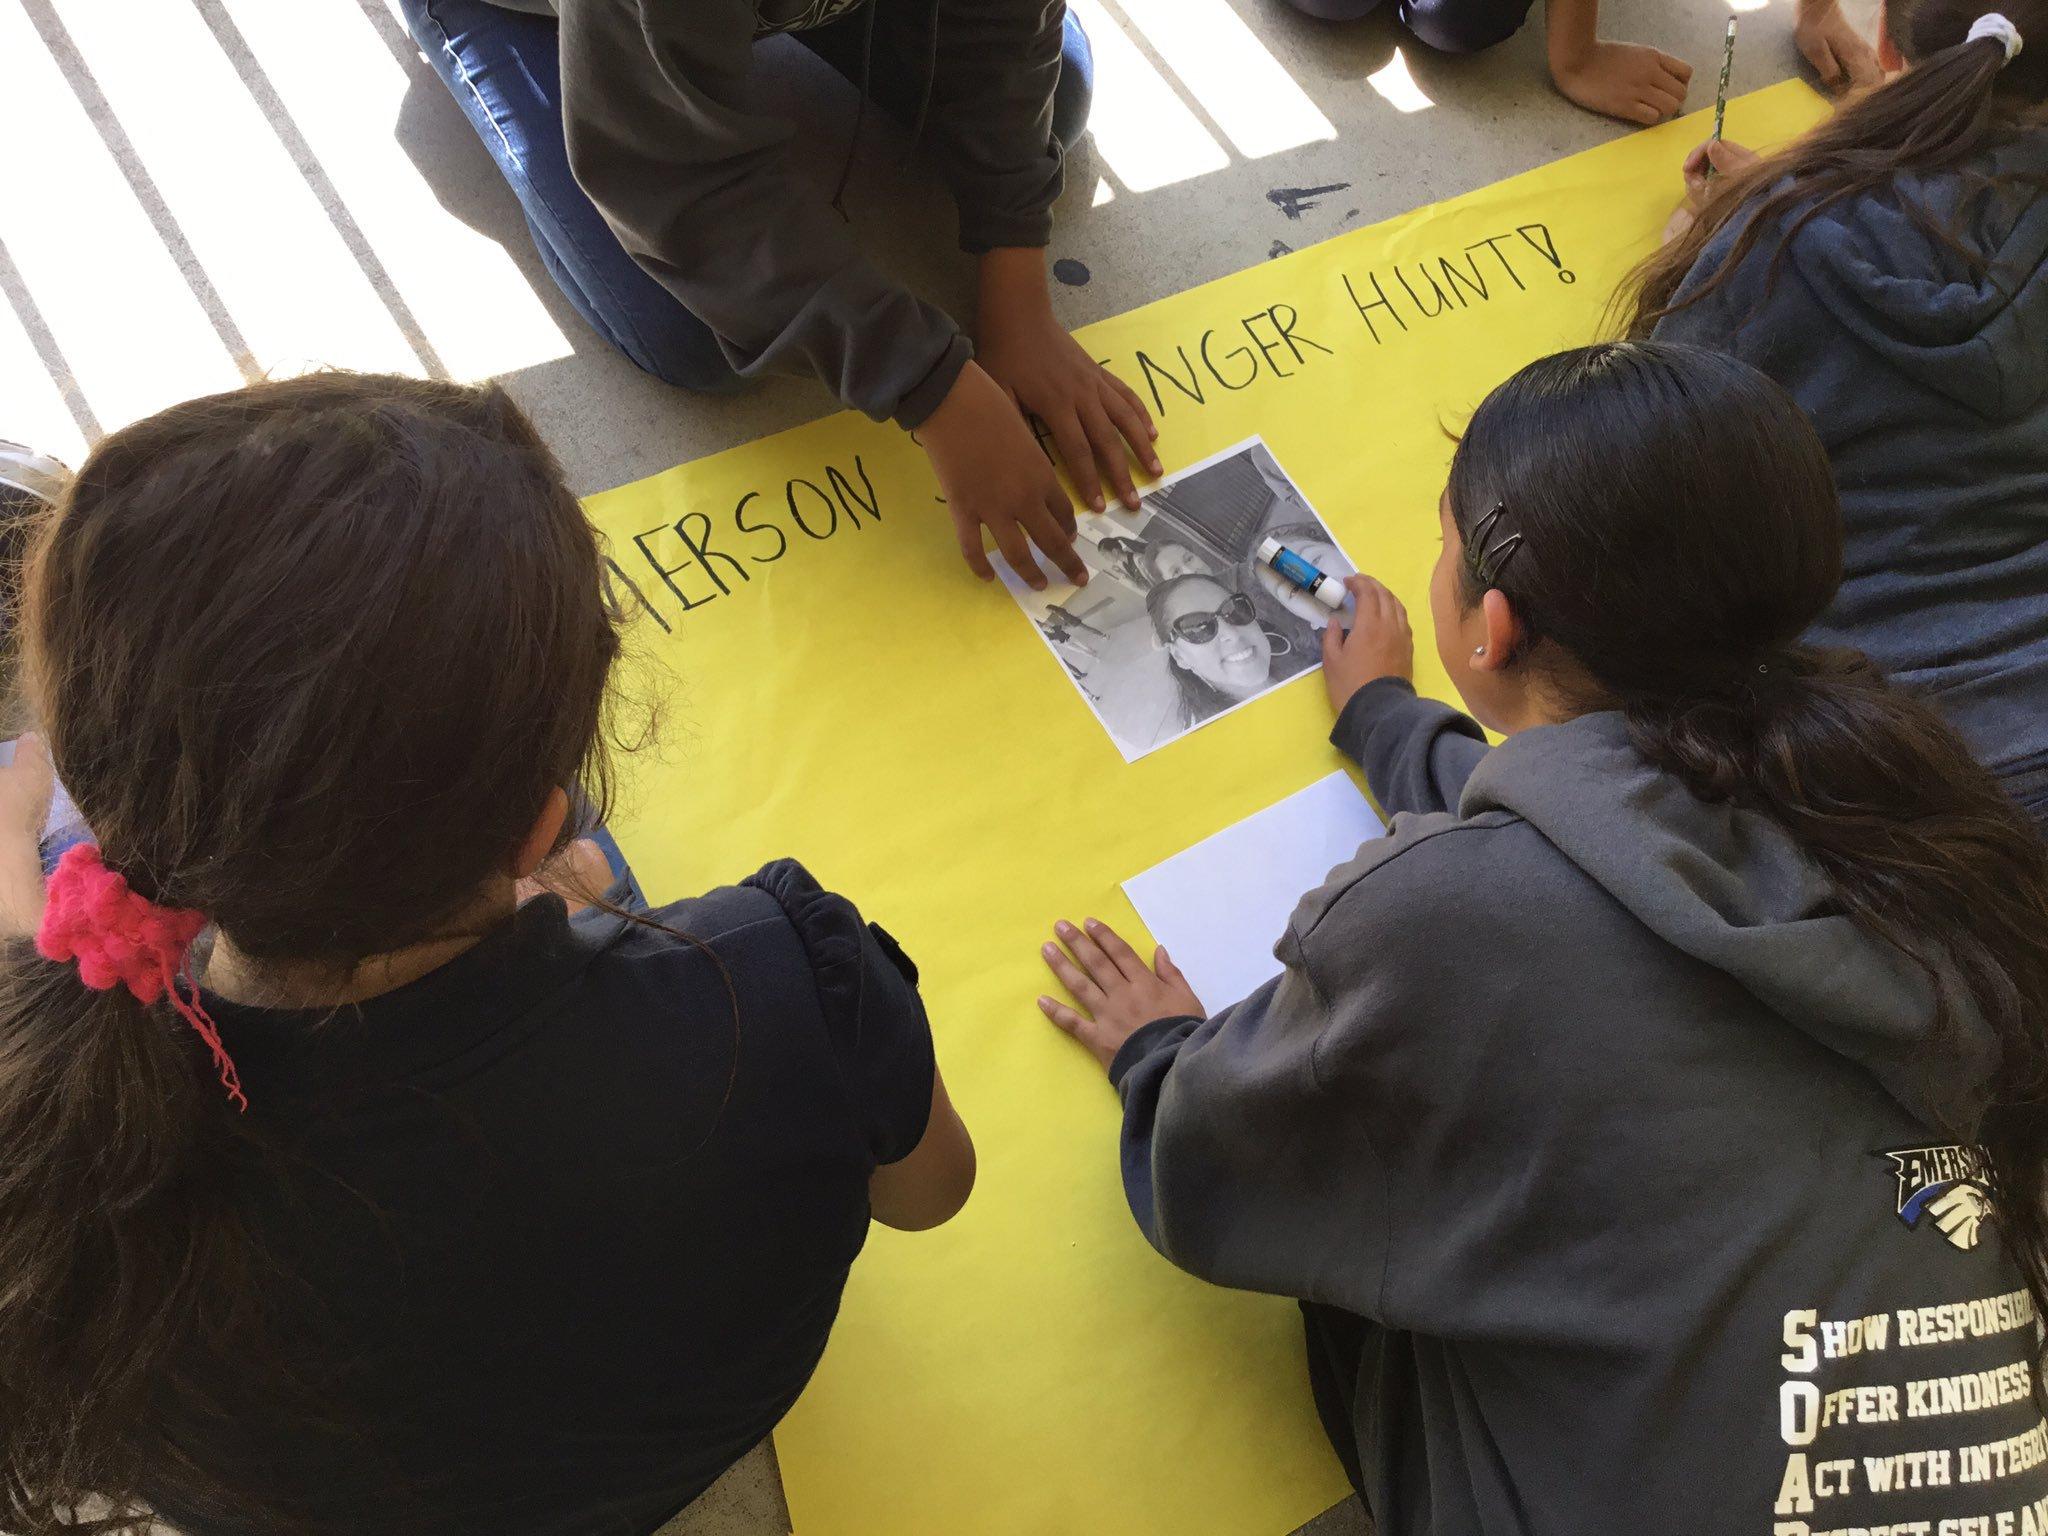 Emerson students are focused on AVID Strategies for Success, they made posters of self-portraits right after they practiced their professional handshakes. #THISISAVID #Proud2bePUSD #AVID #EmersonEAGLES